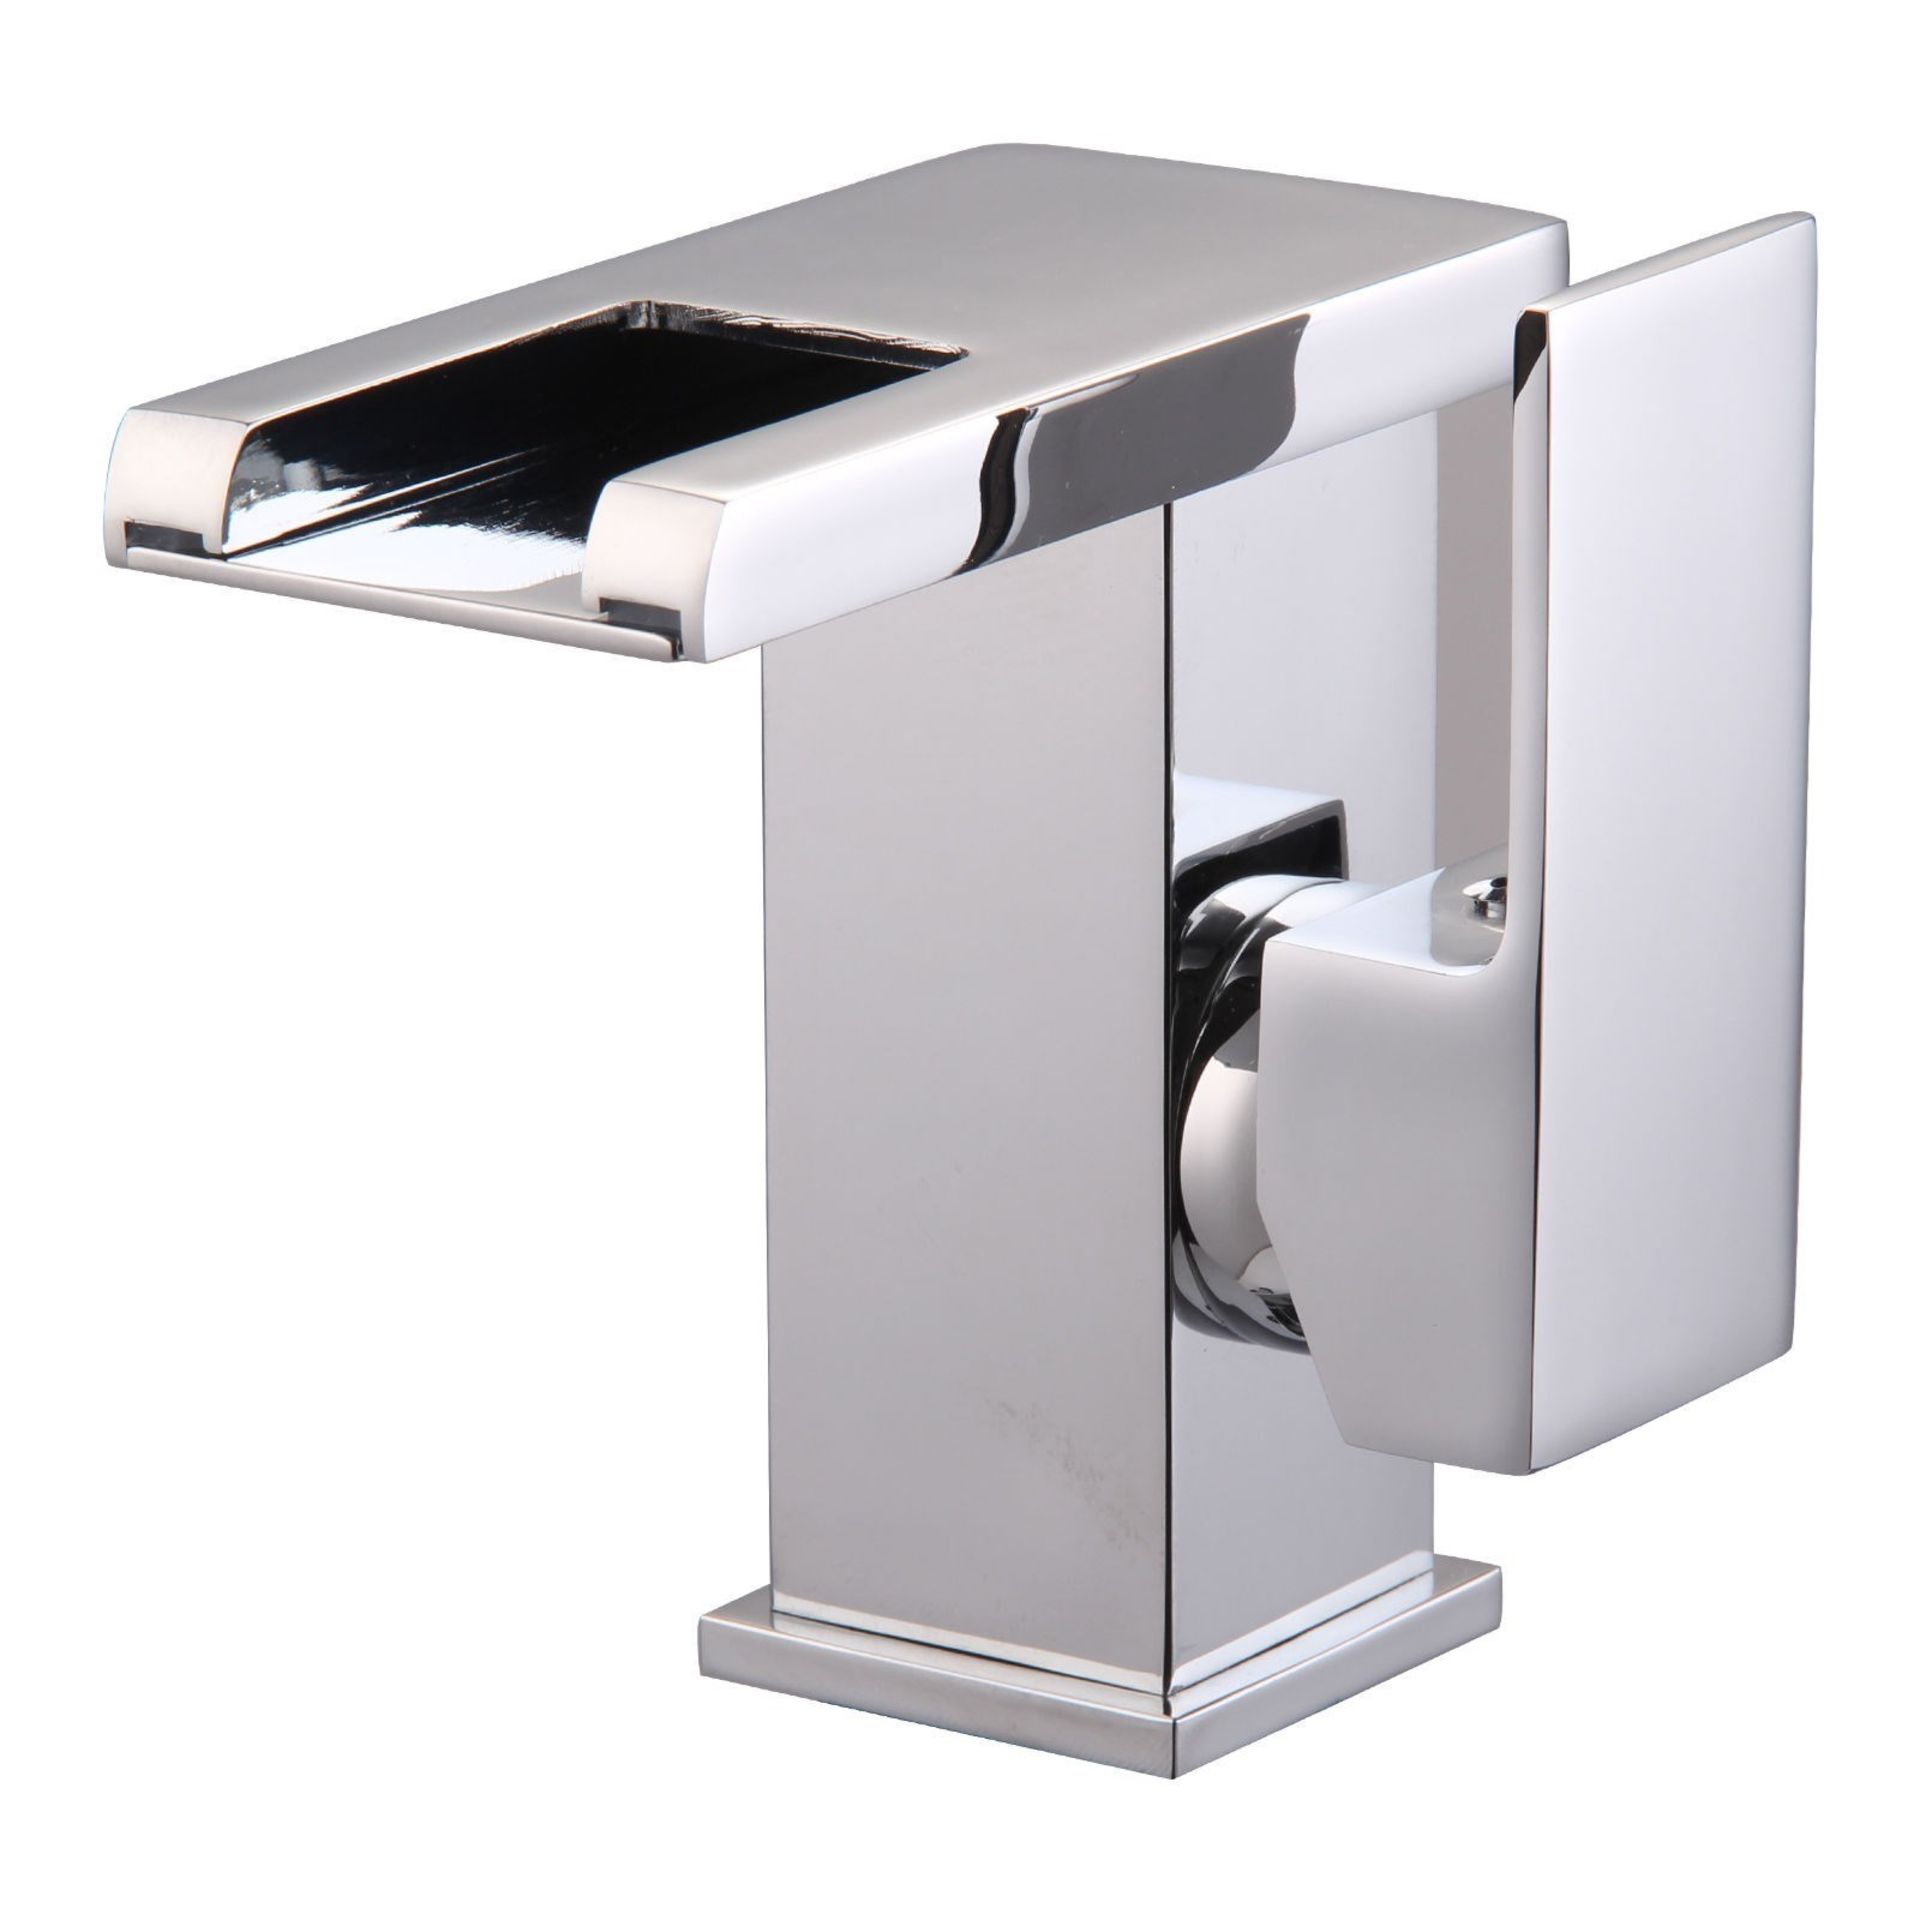 LED Waterfall Bathroom Basin Mixer Tap. RRP £229.99. Easy to install and clean. All copper mounting - Image 6 of 6